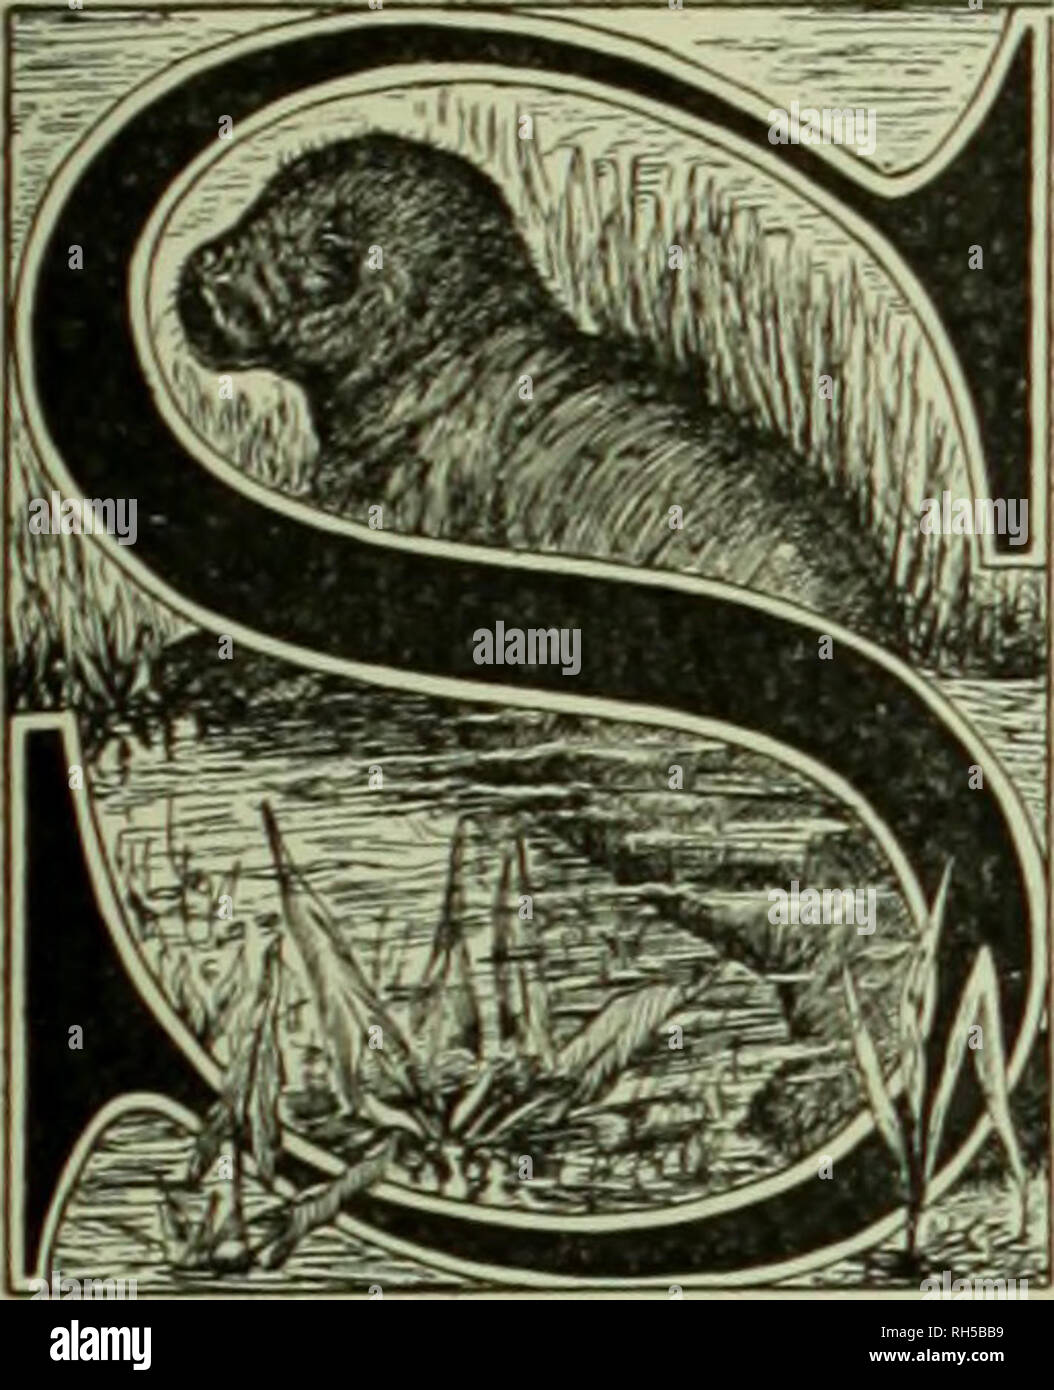 Brehm's Life of animals : a complete natural history for popular home  instruction and for the use of schools. Mammalia. Mammals; Animal behavior.  Zhc Sea Cows. TWELFTH ORDER: Sirenia.. TUDEXTS reading